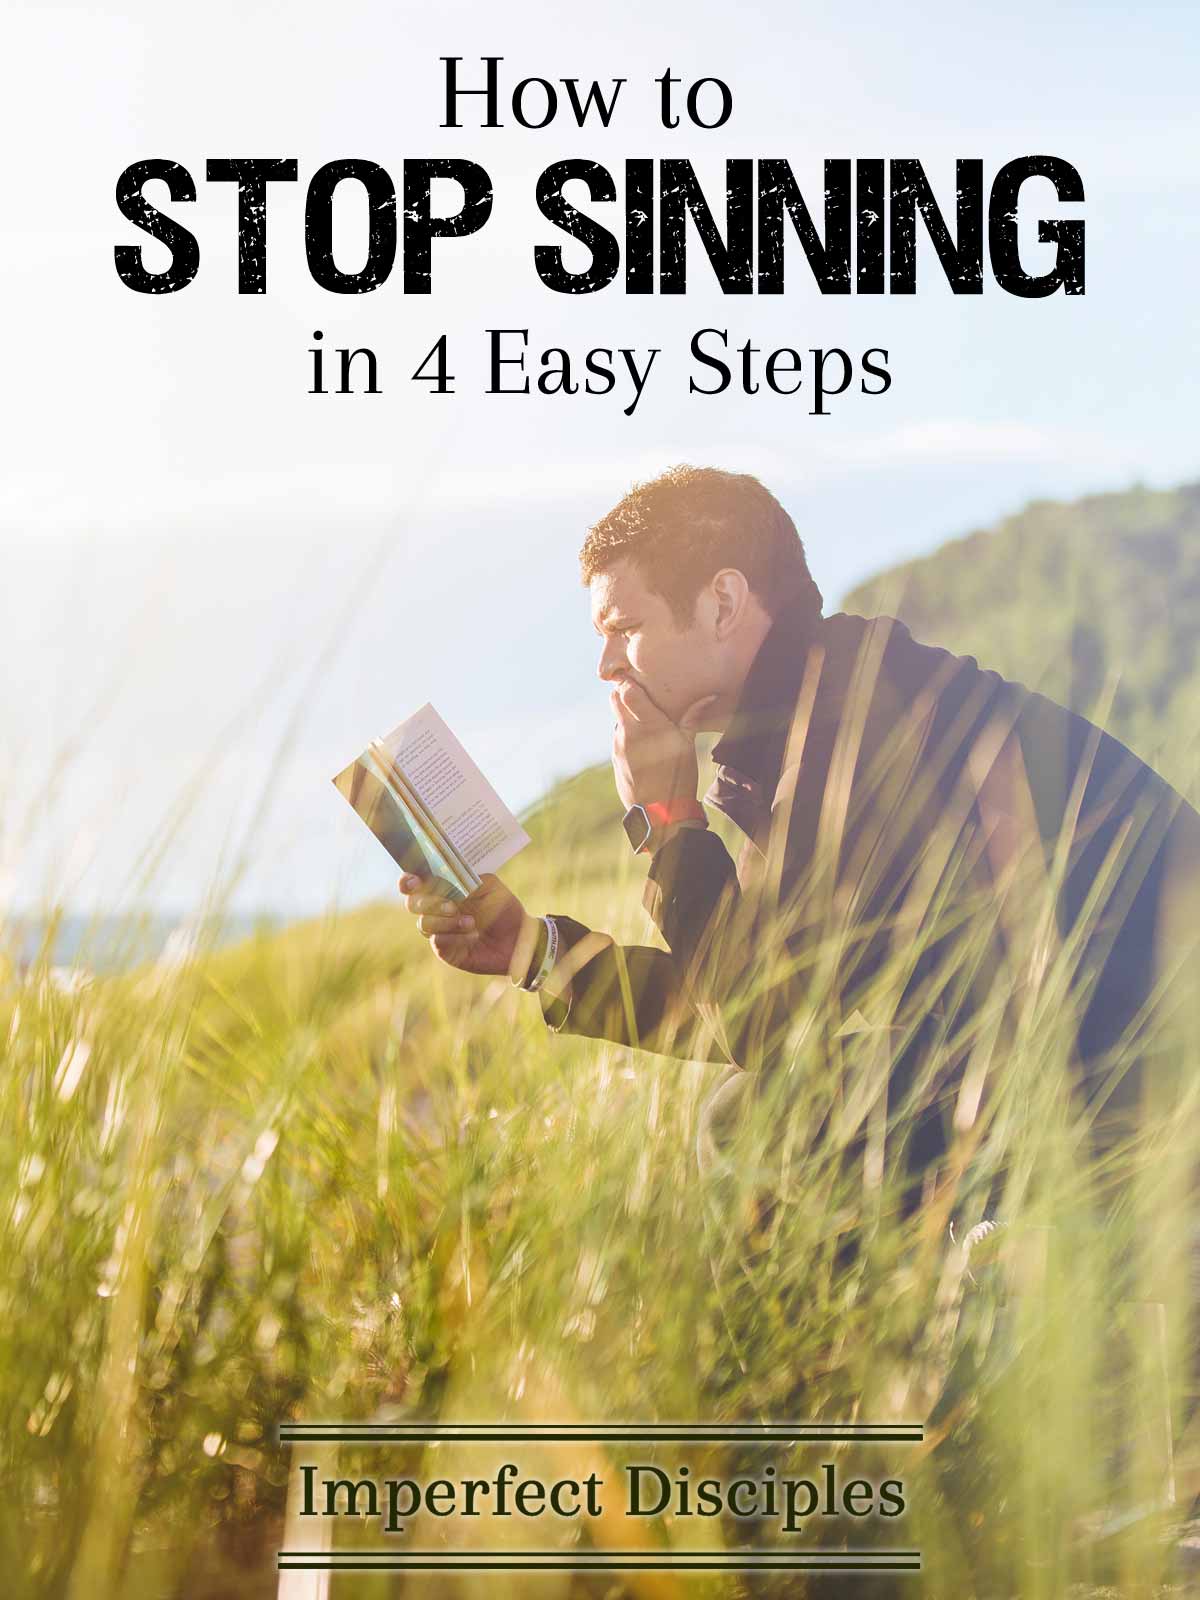 How to Stop Sinning in 4 Easy Steps